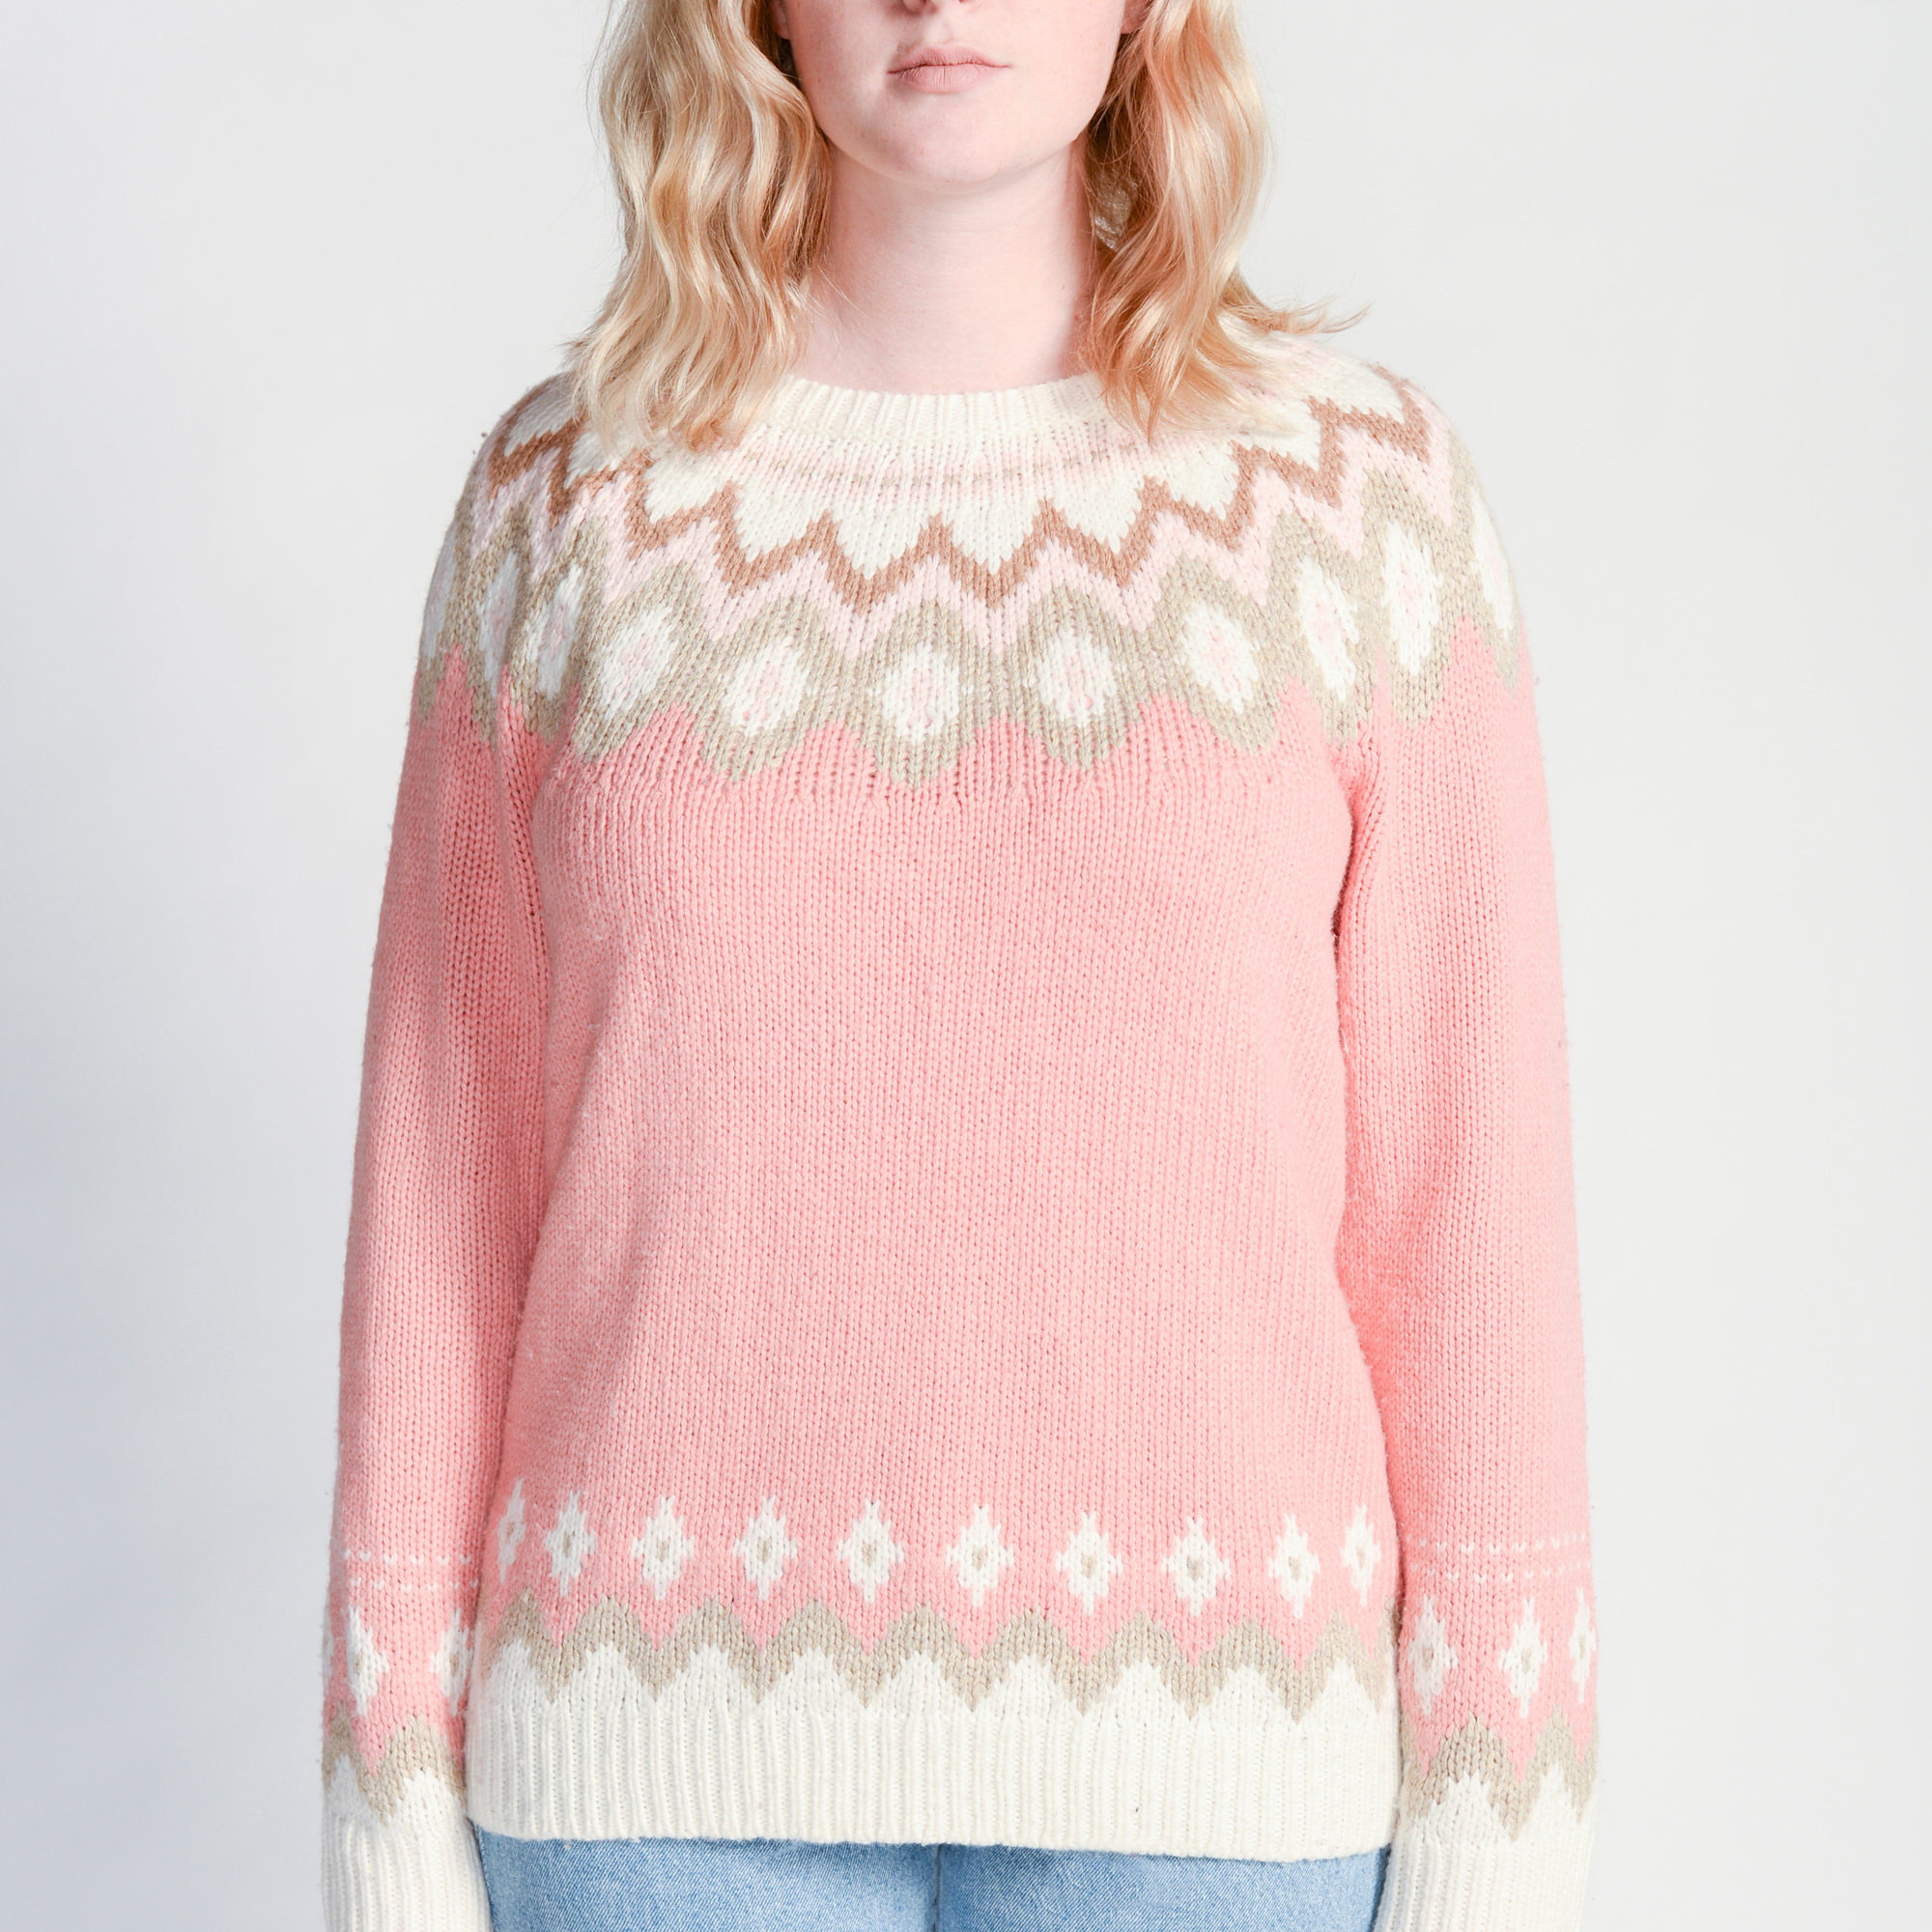 allsweaters_0004_layer-4